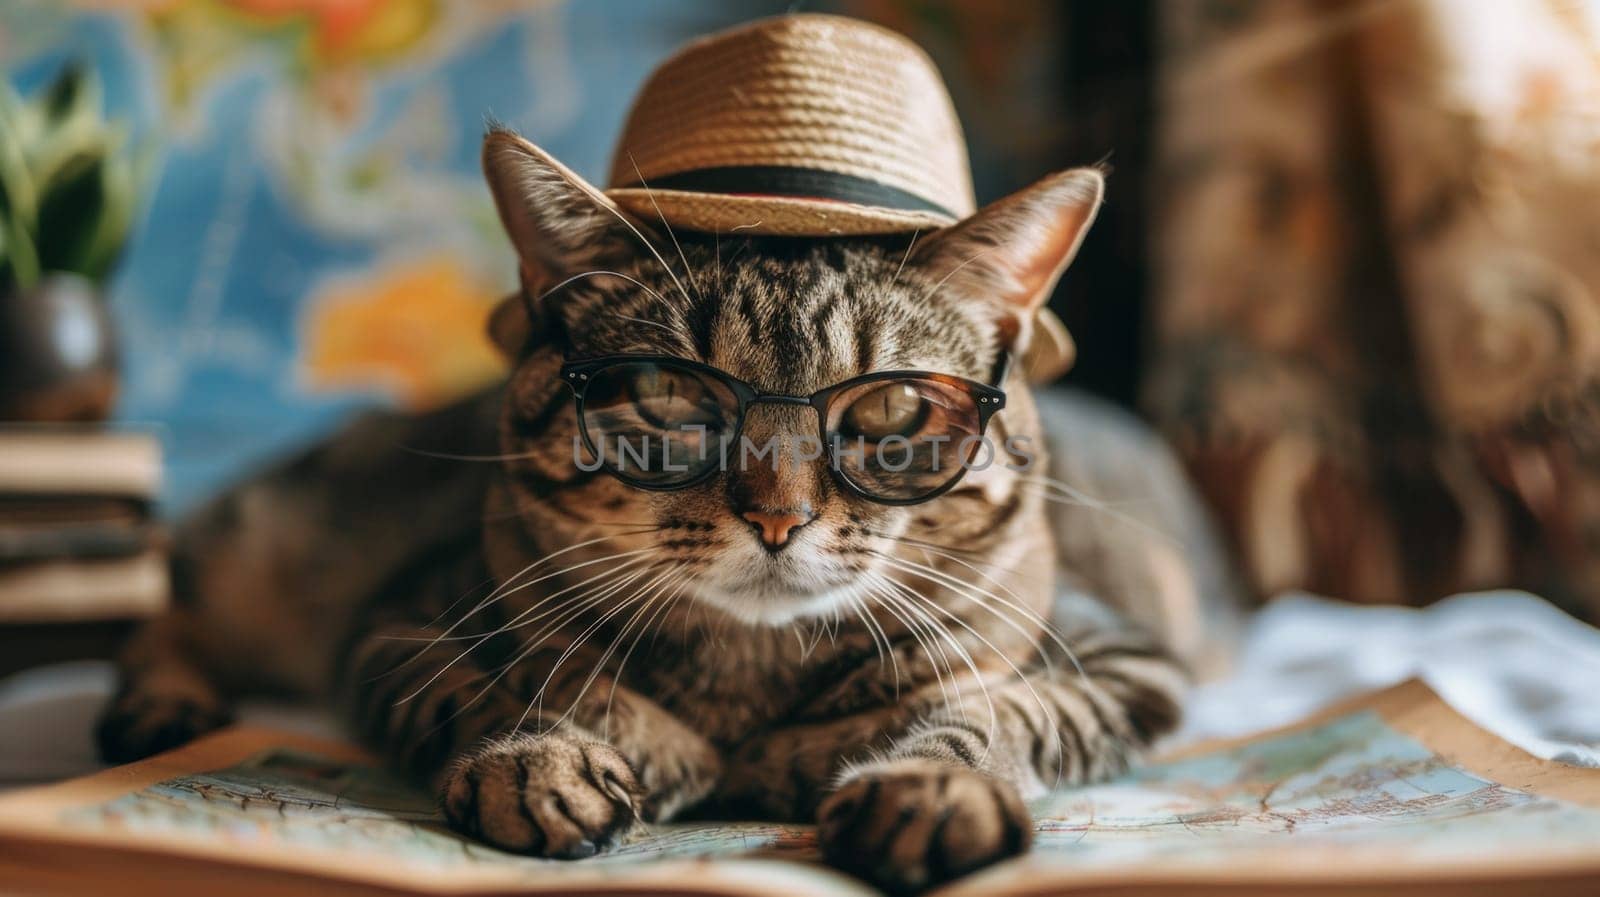 A cat wearing a hat and glasses laying on top of an open book